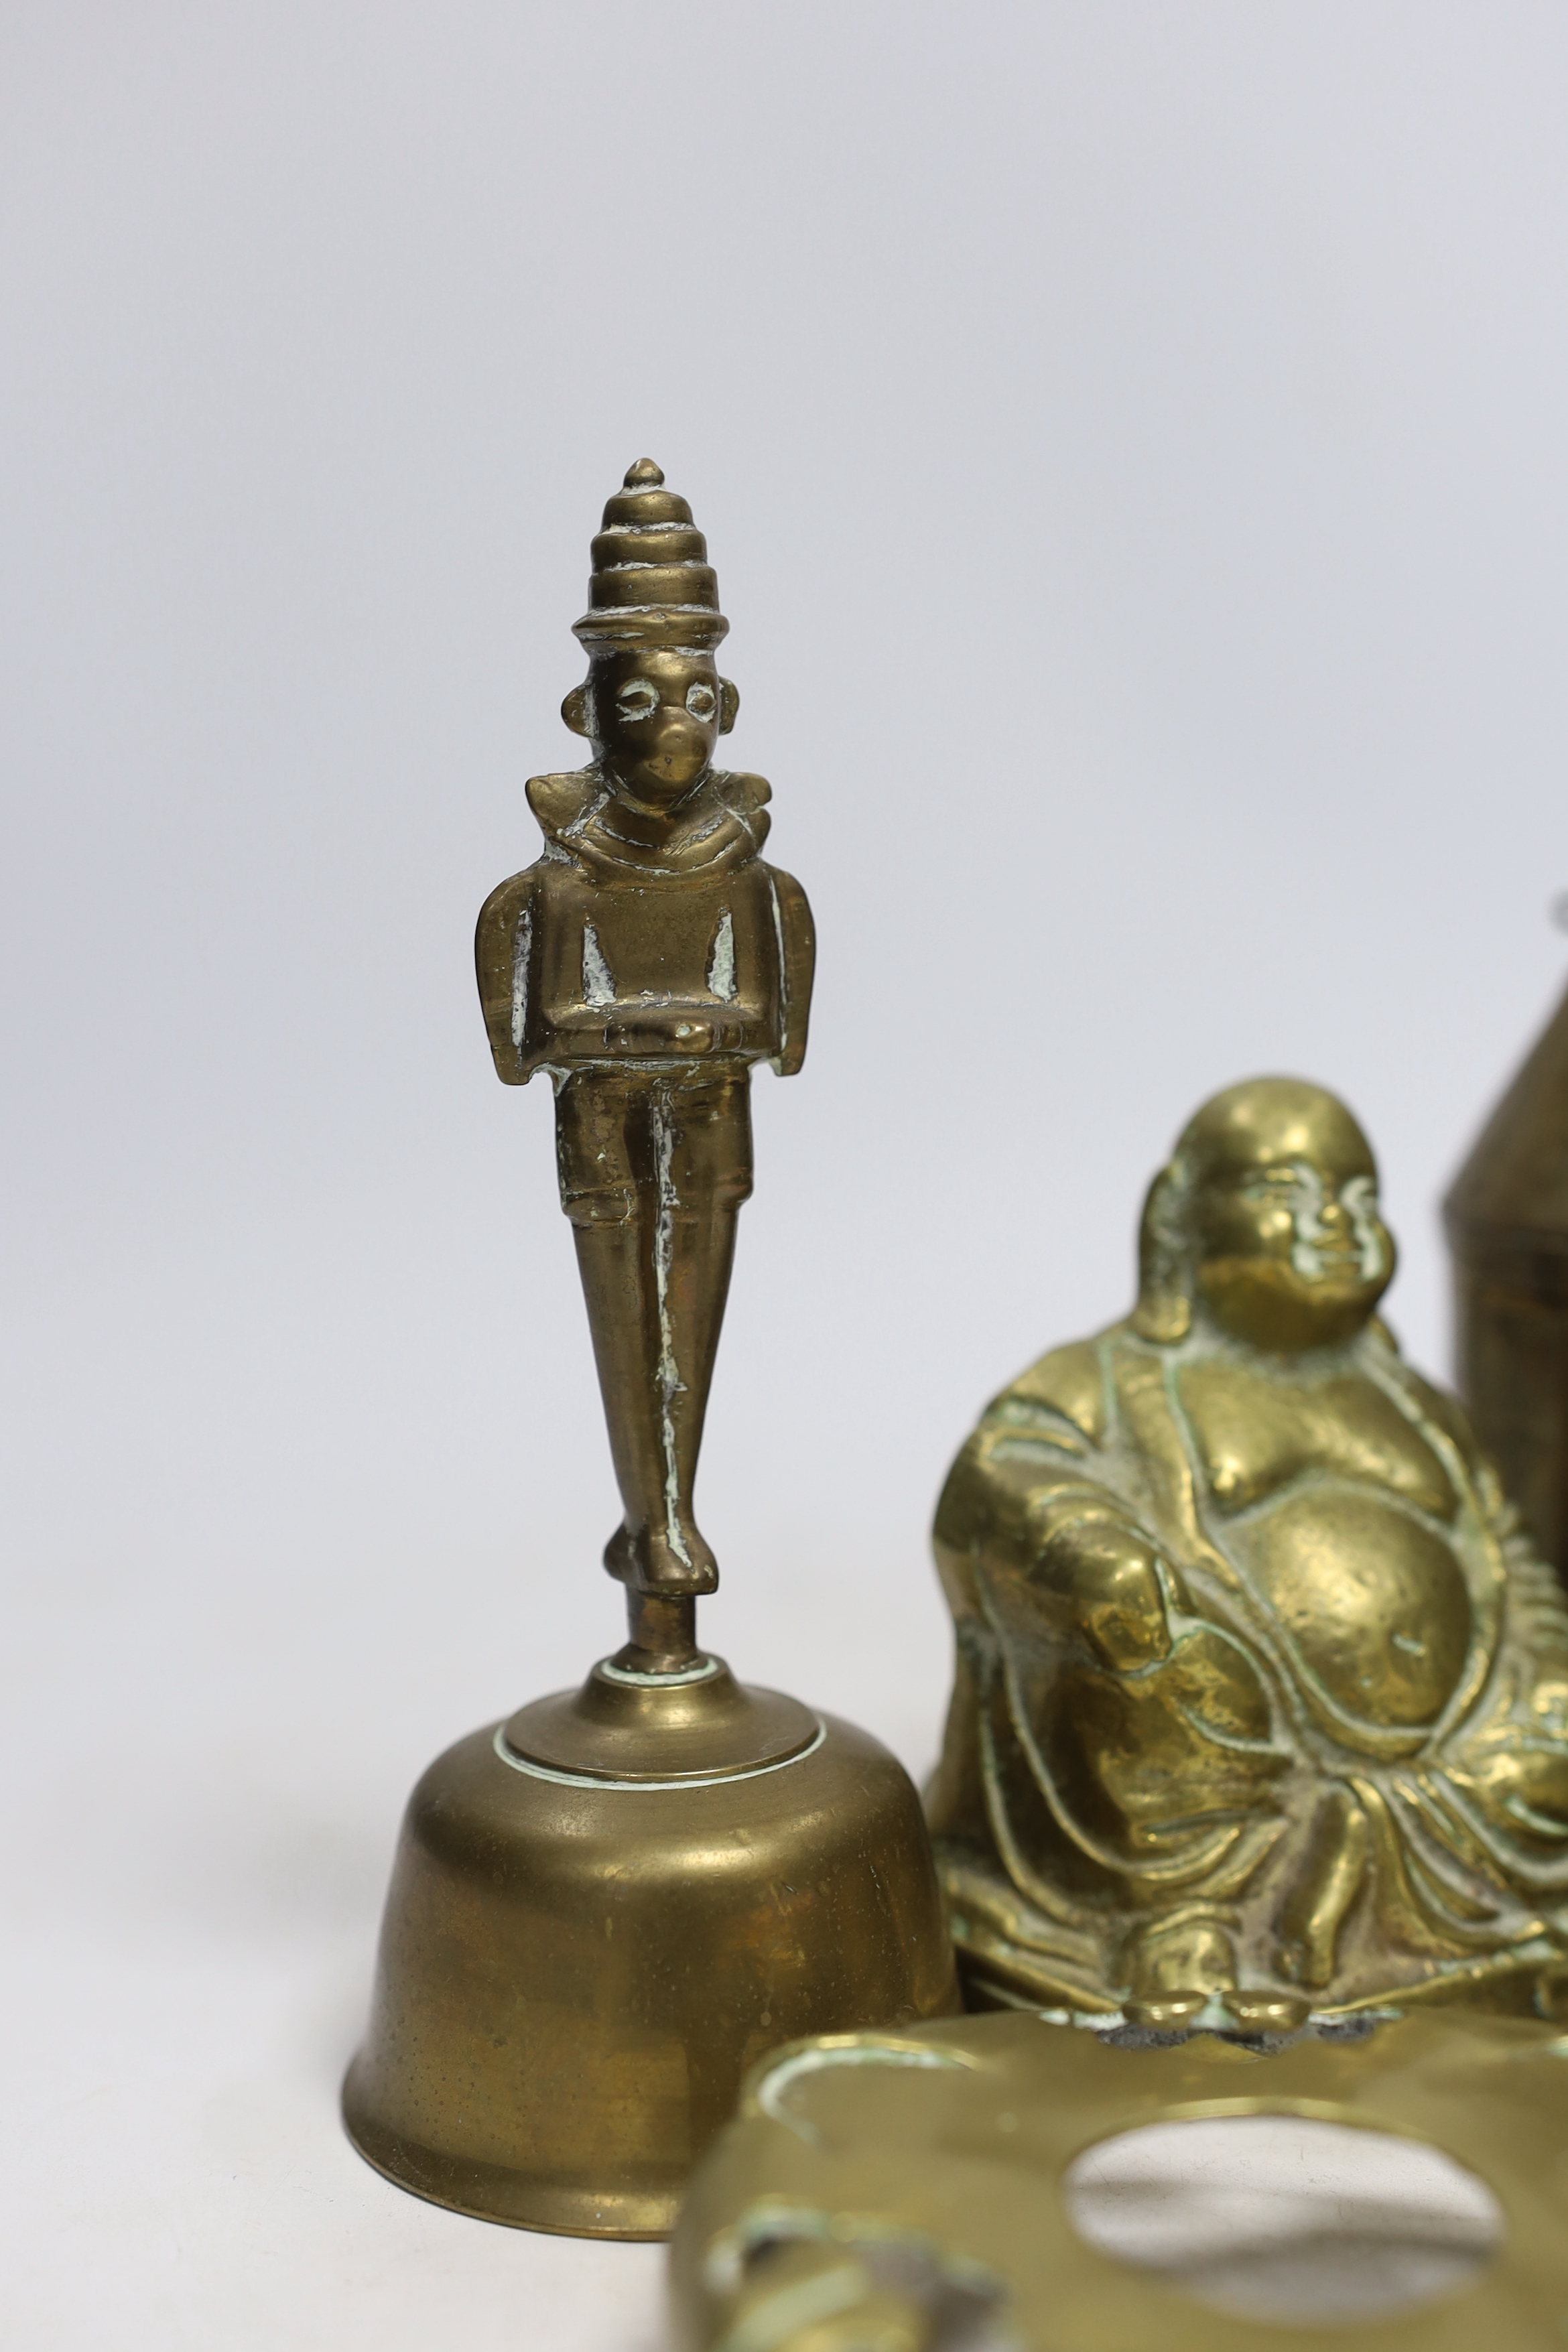 Sundry metalware including hinged brass frog with compartment, nutcrackers, a seated Buddha and a 925 gilt enamel spoon